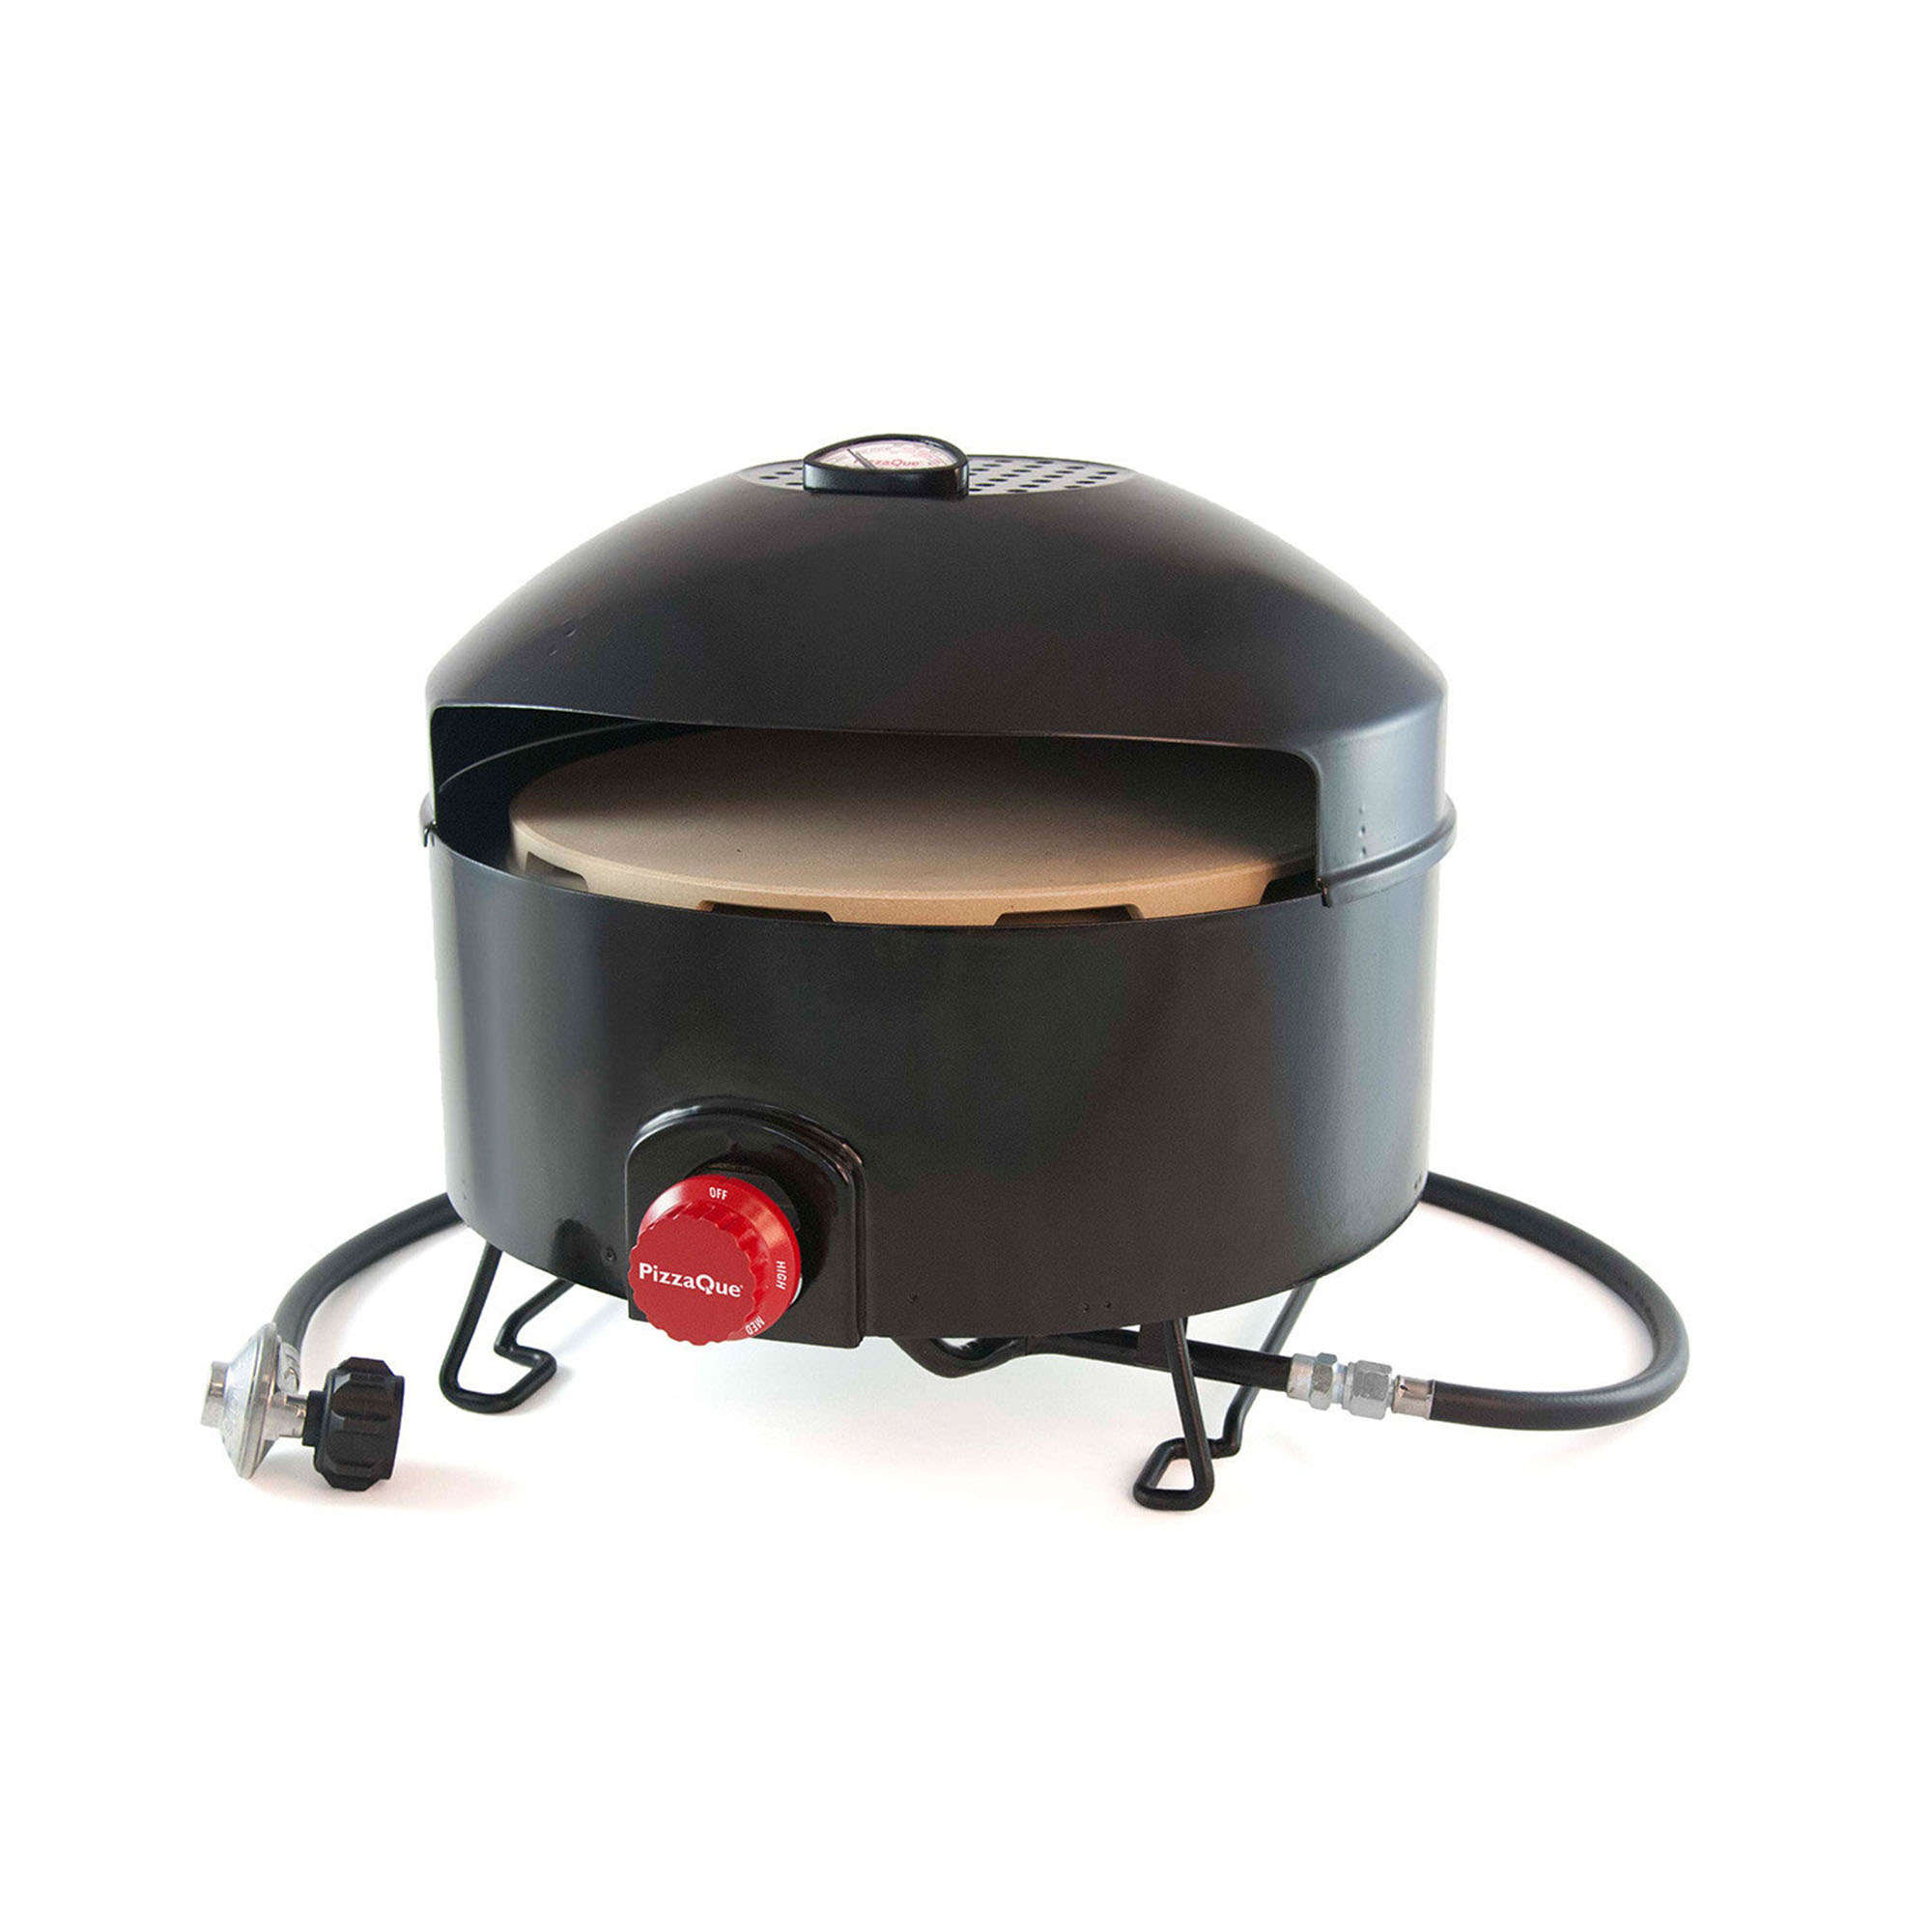 Pizzacraft PC6500 PizzaQue Portable Outdoor Pizza Oven - image 4 of 9